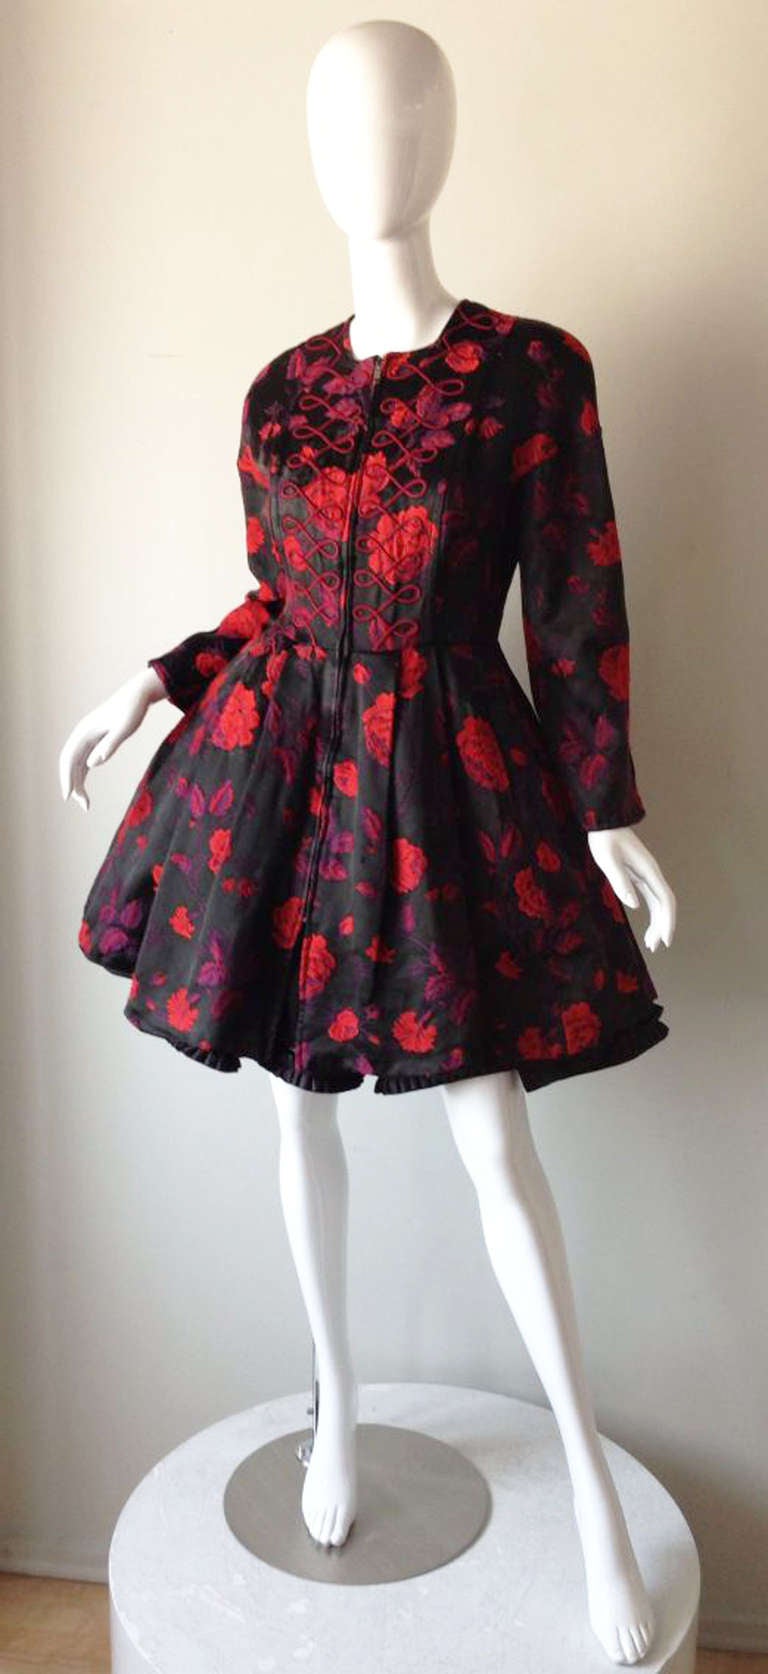 A fine and rare vintage Christian Lacroix pouf cocktail dress. Heavy silk floral brocade fabric item features a nipped waist, 